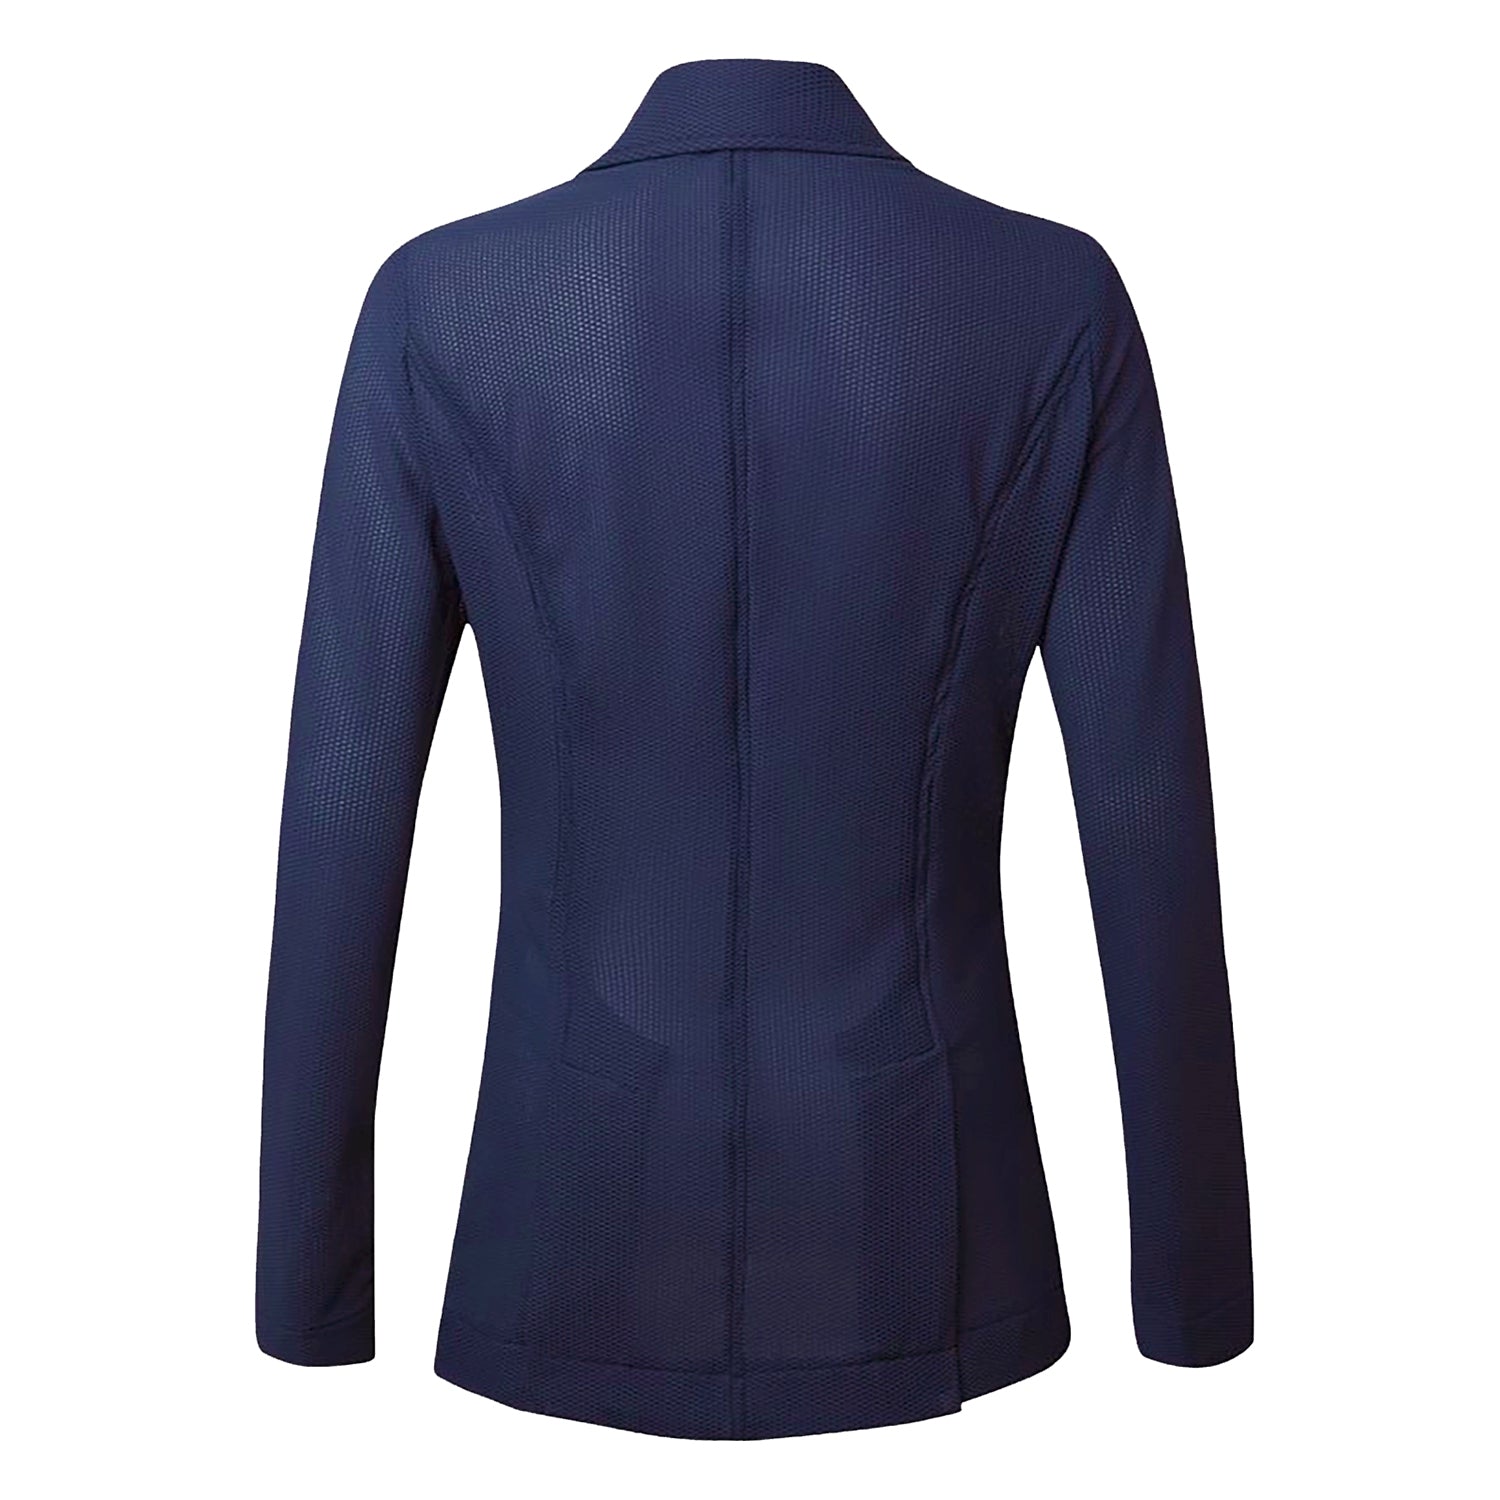 AA Ladies Motionlite Competition Jacket